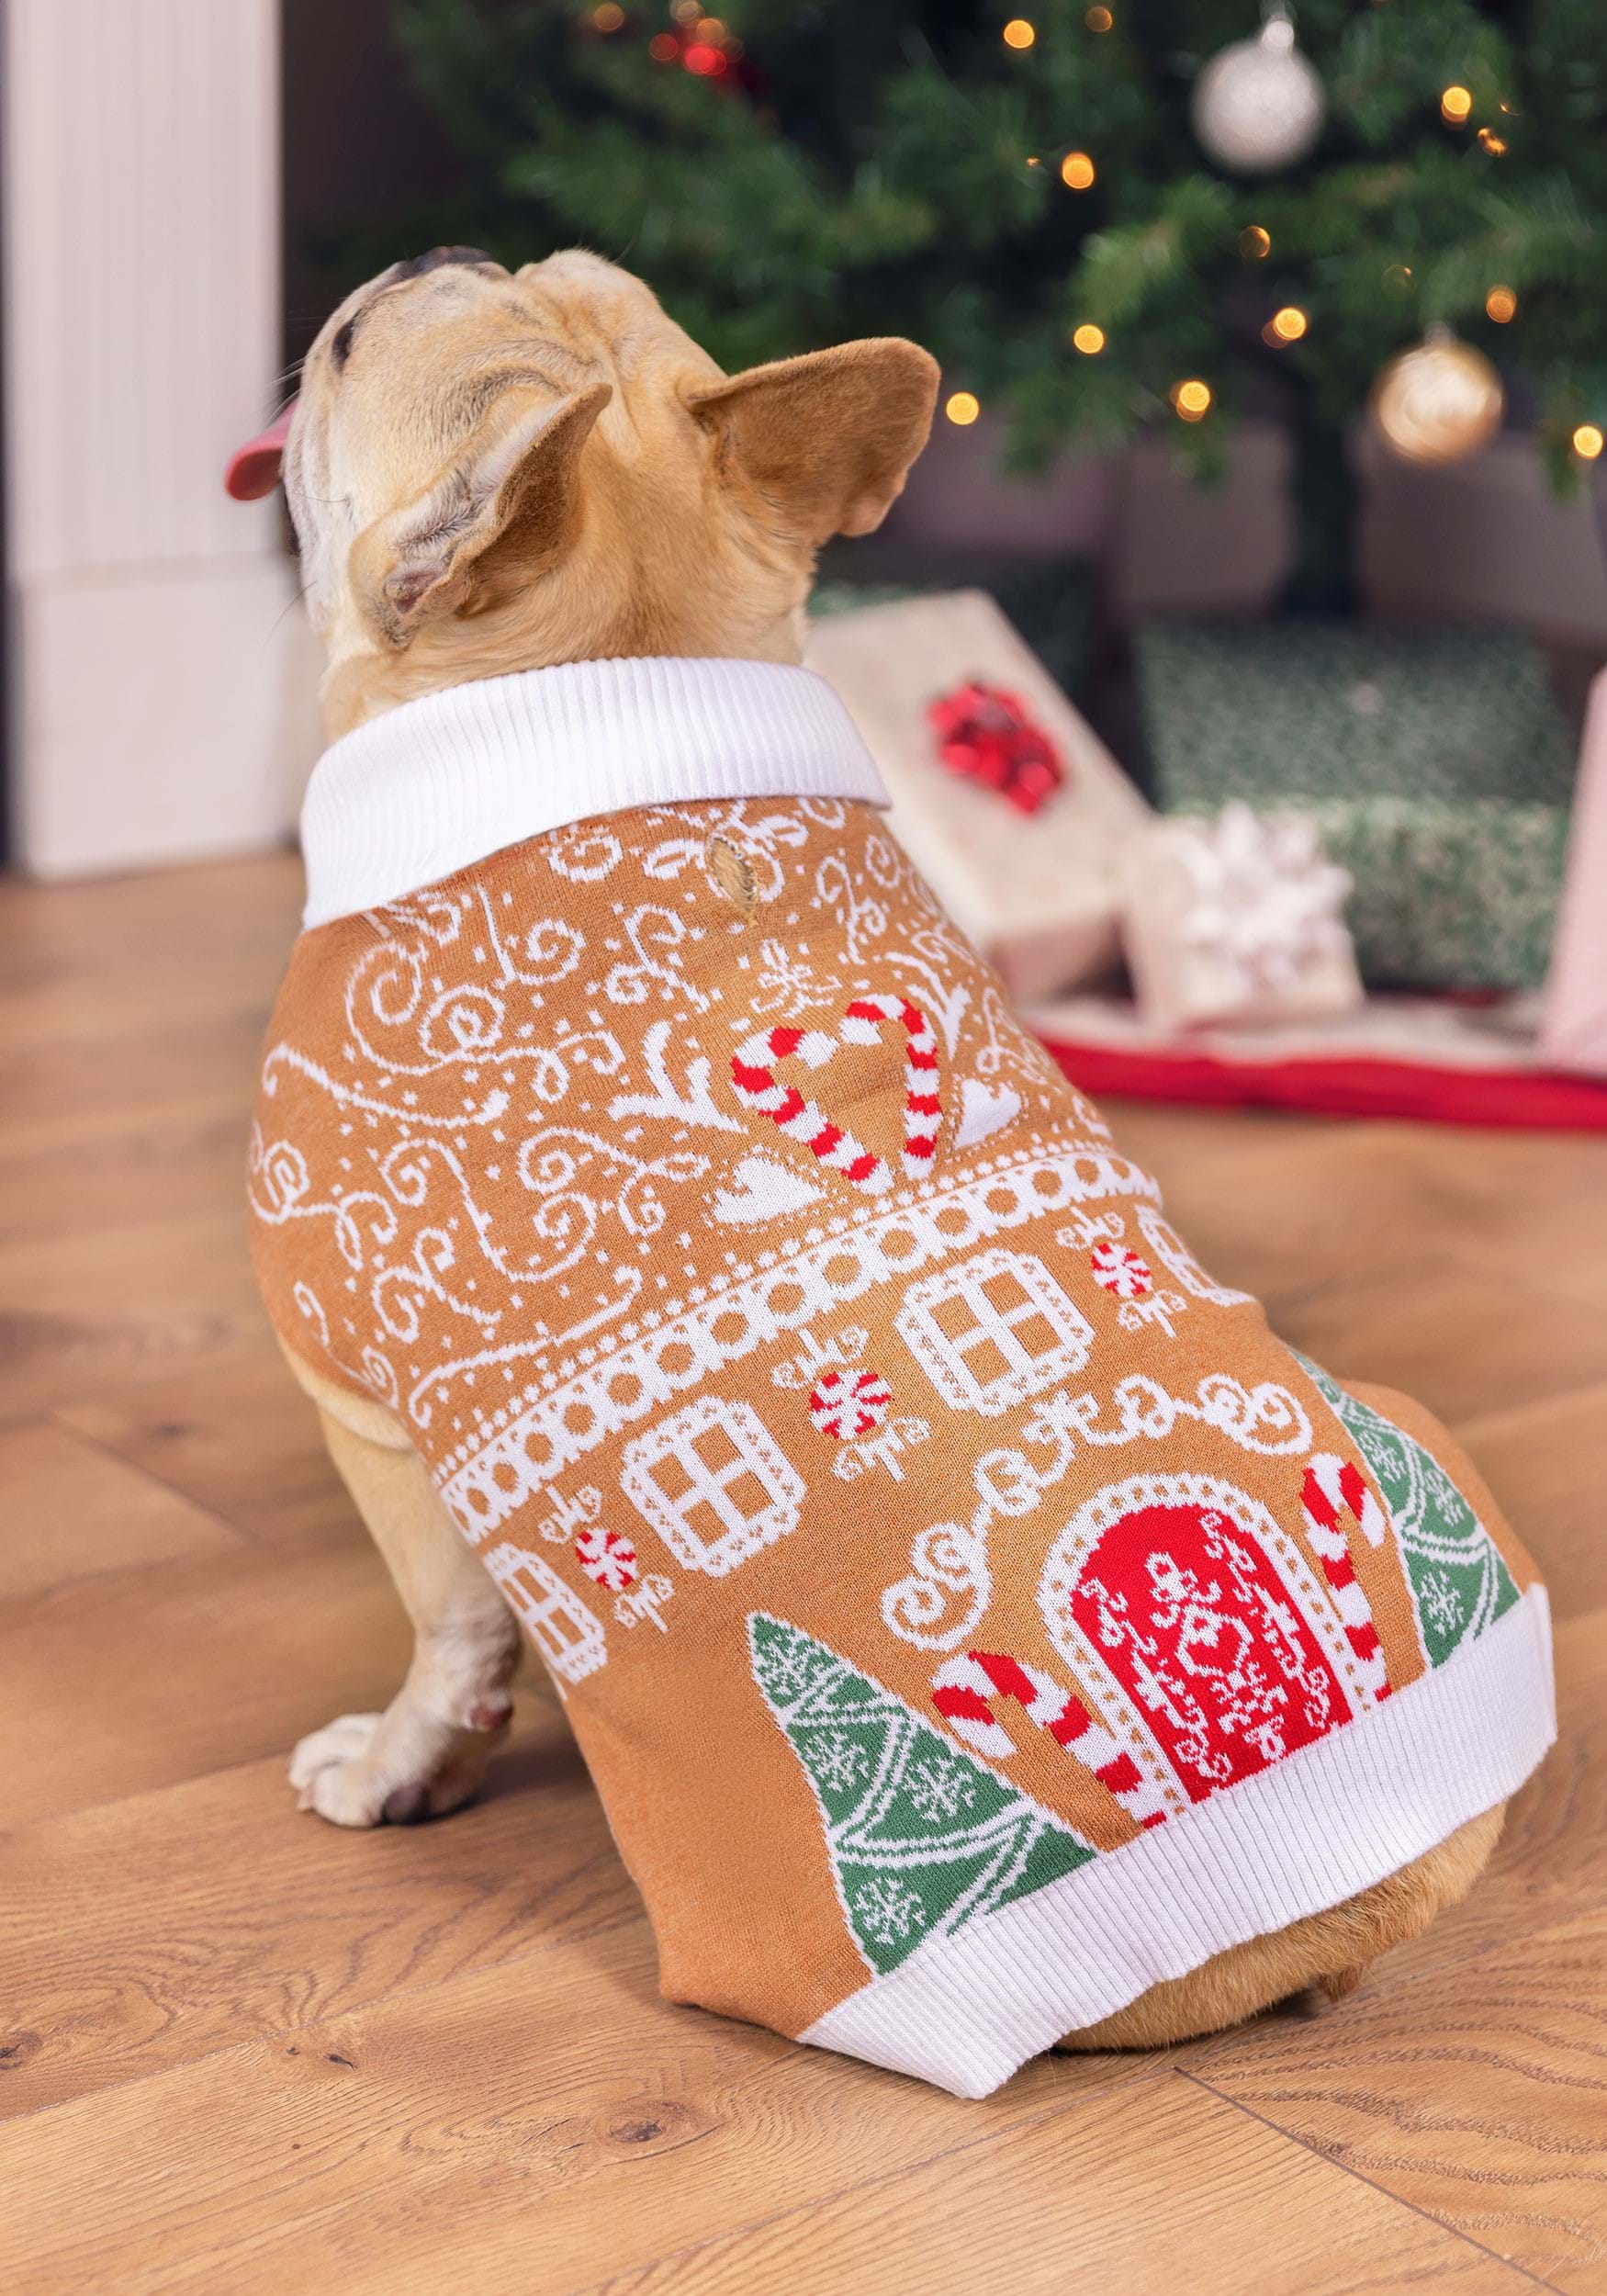 15 Best Dog Christmas Sweaters - Cute Christmas Sweaters and Outfits for  Large and Small Dogs